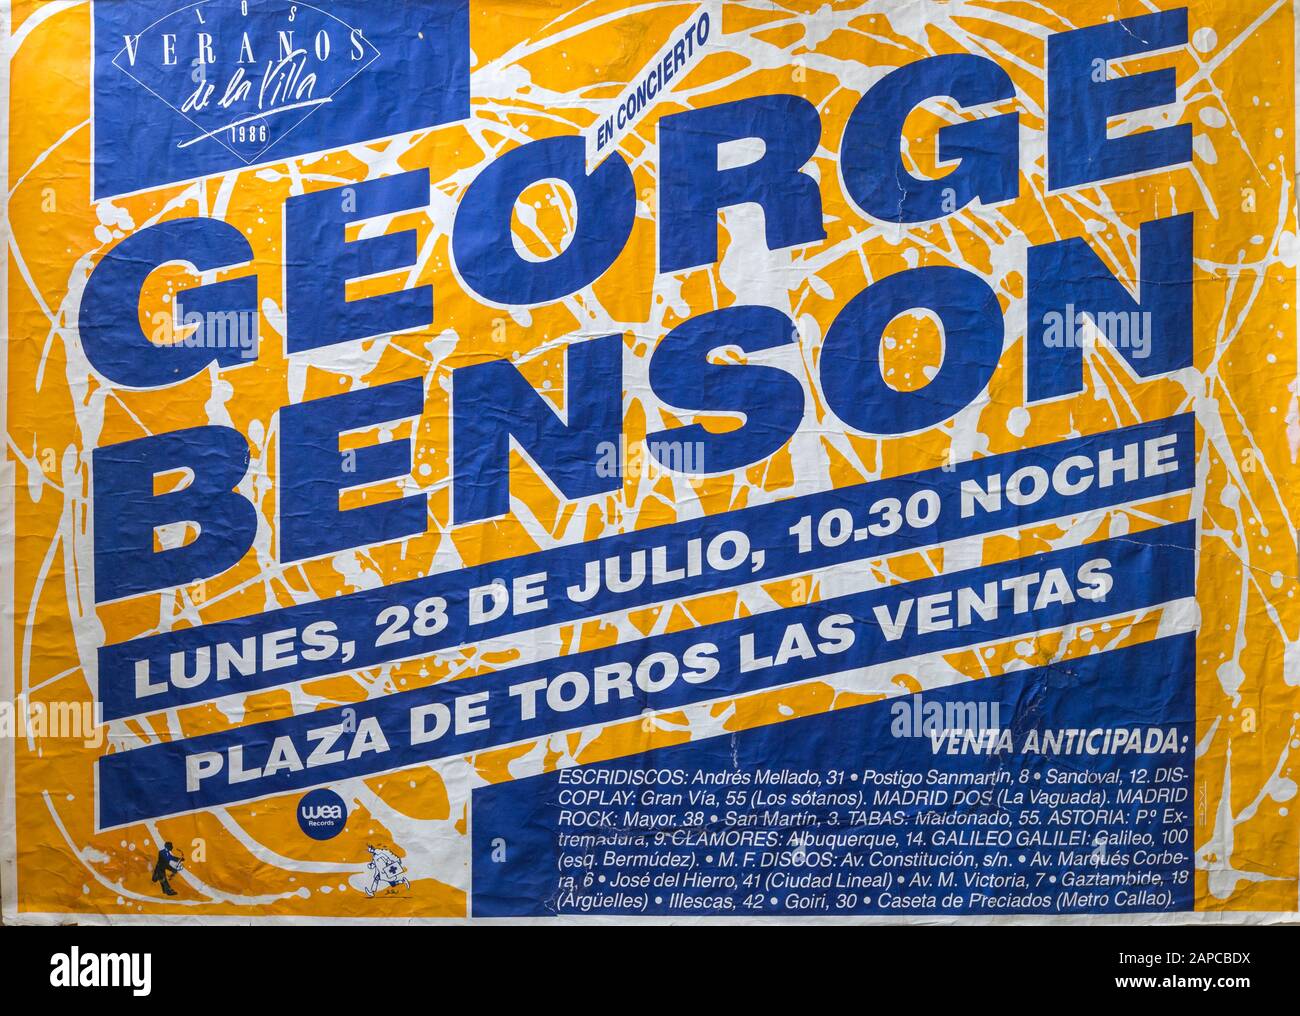 George Benson Madrid 1986 tour, Musical concert poster Stock Photo